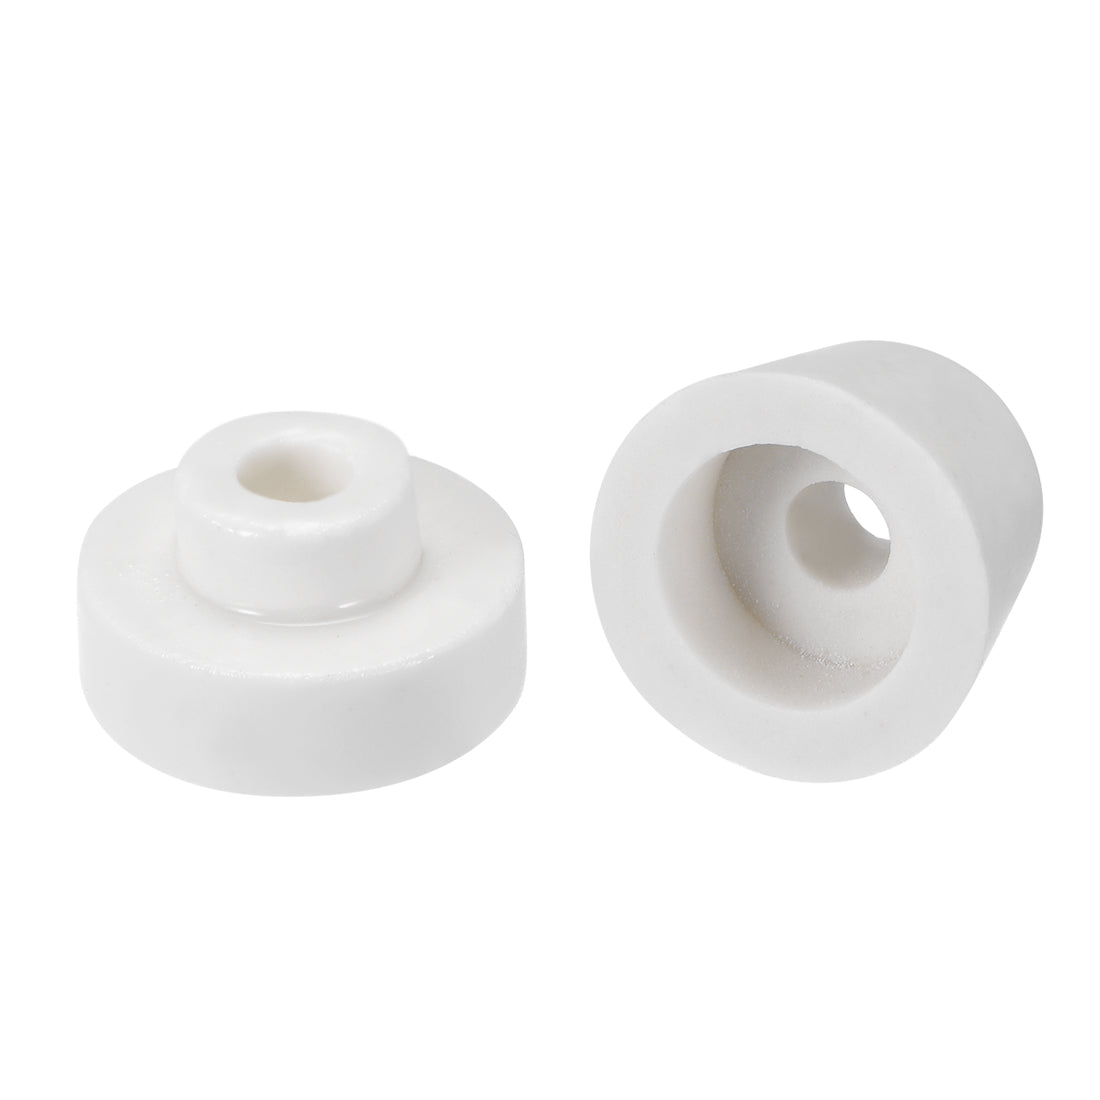 uxcell Uxcell 6.3mm Dia Ceramic Tapered Insulators Beads Alumina Porcelain Stepped Insulator for Heating Wire 2 Pcs